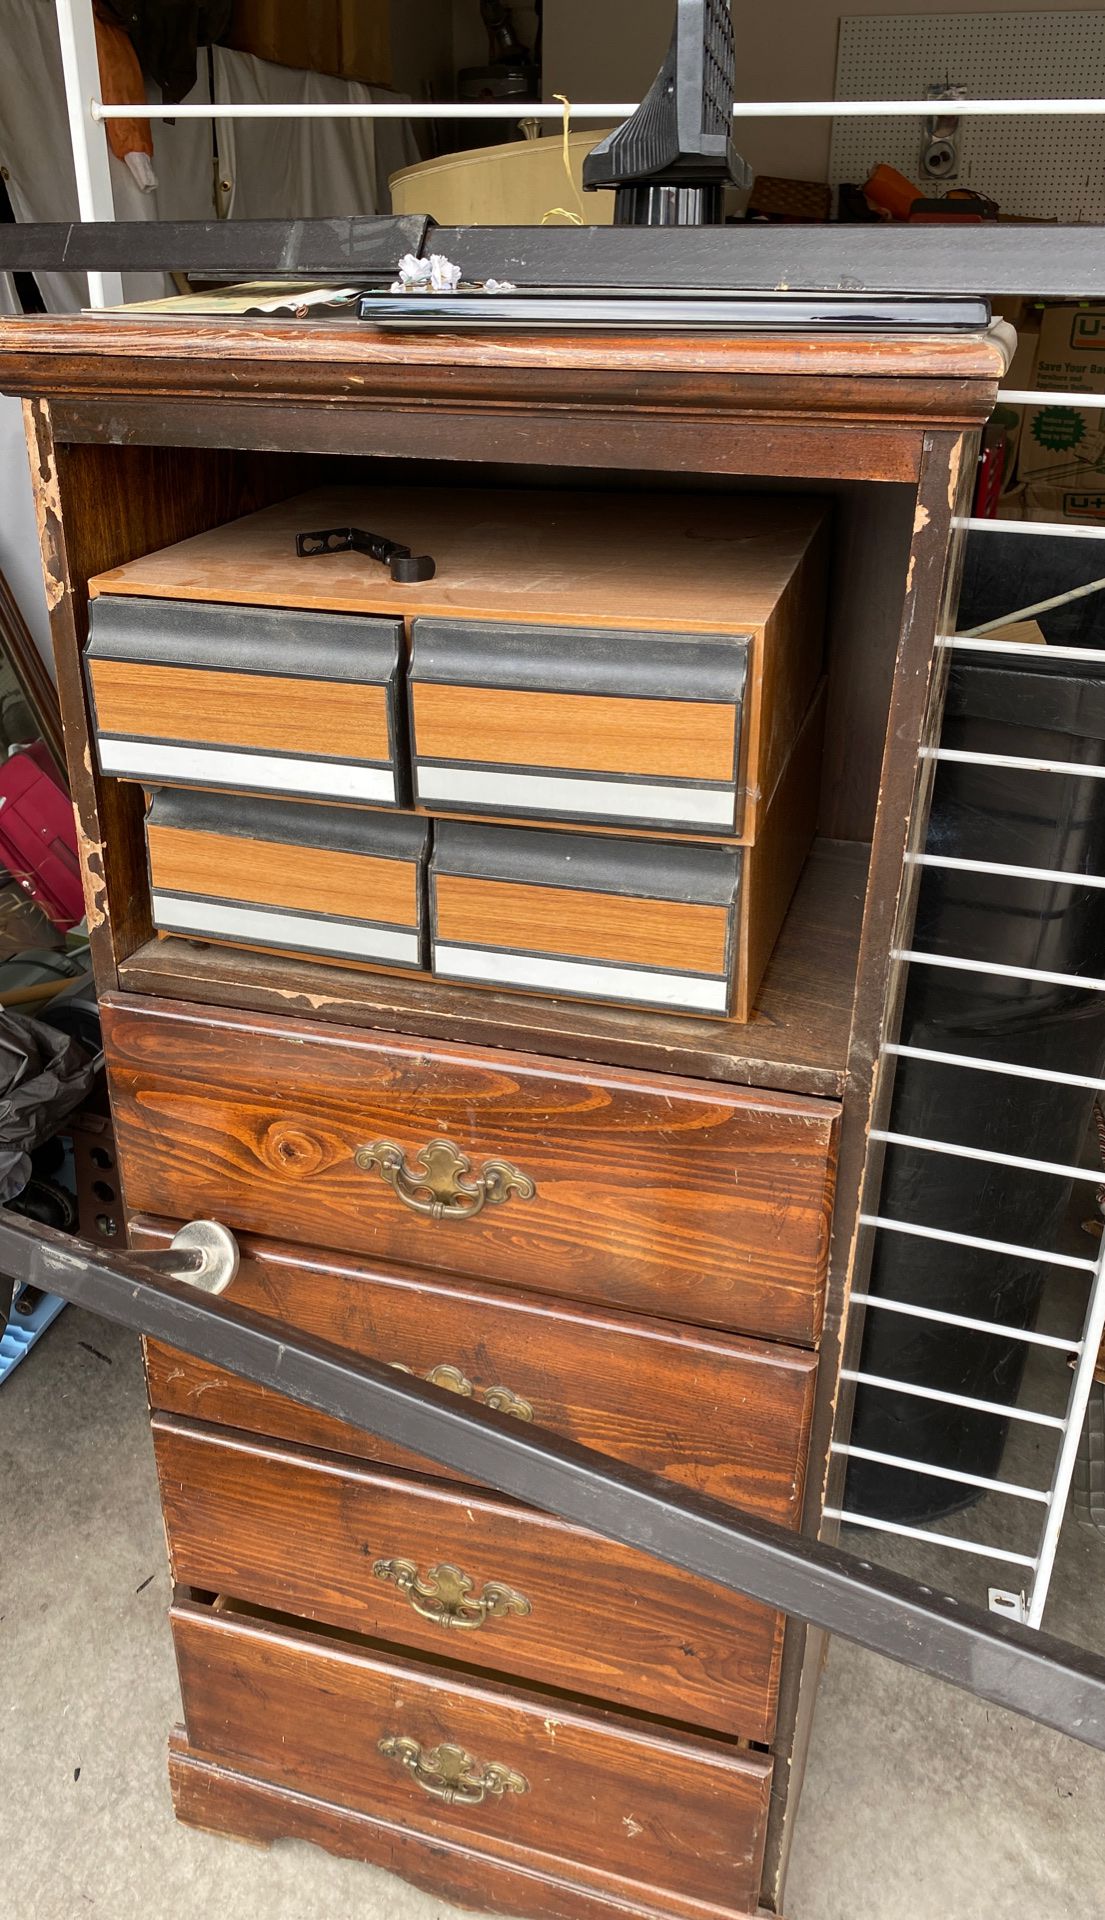 FREE VINTAGE Drawer and side table set